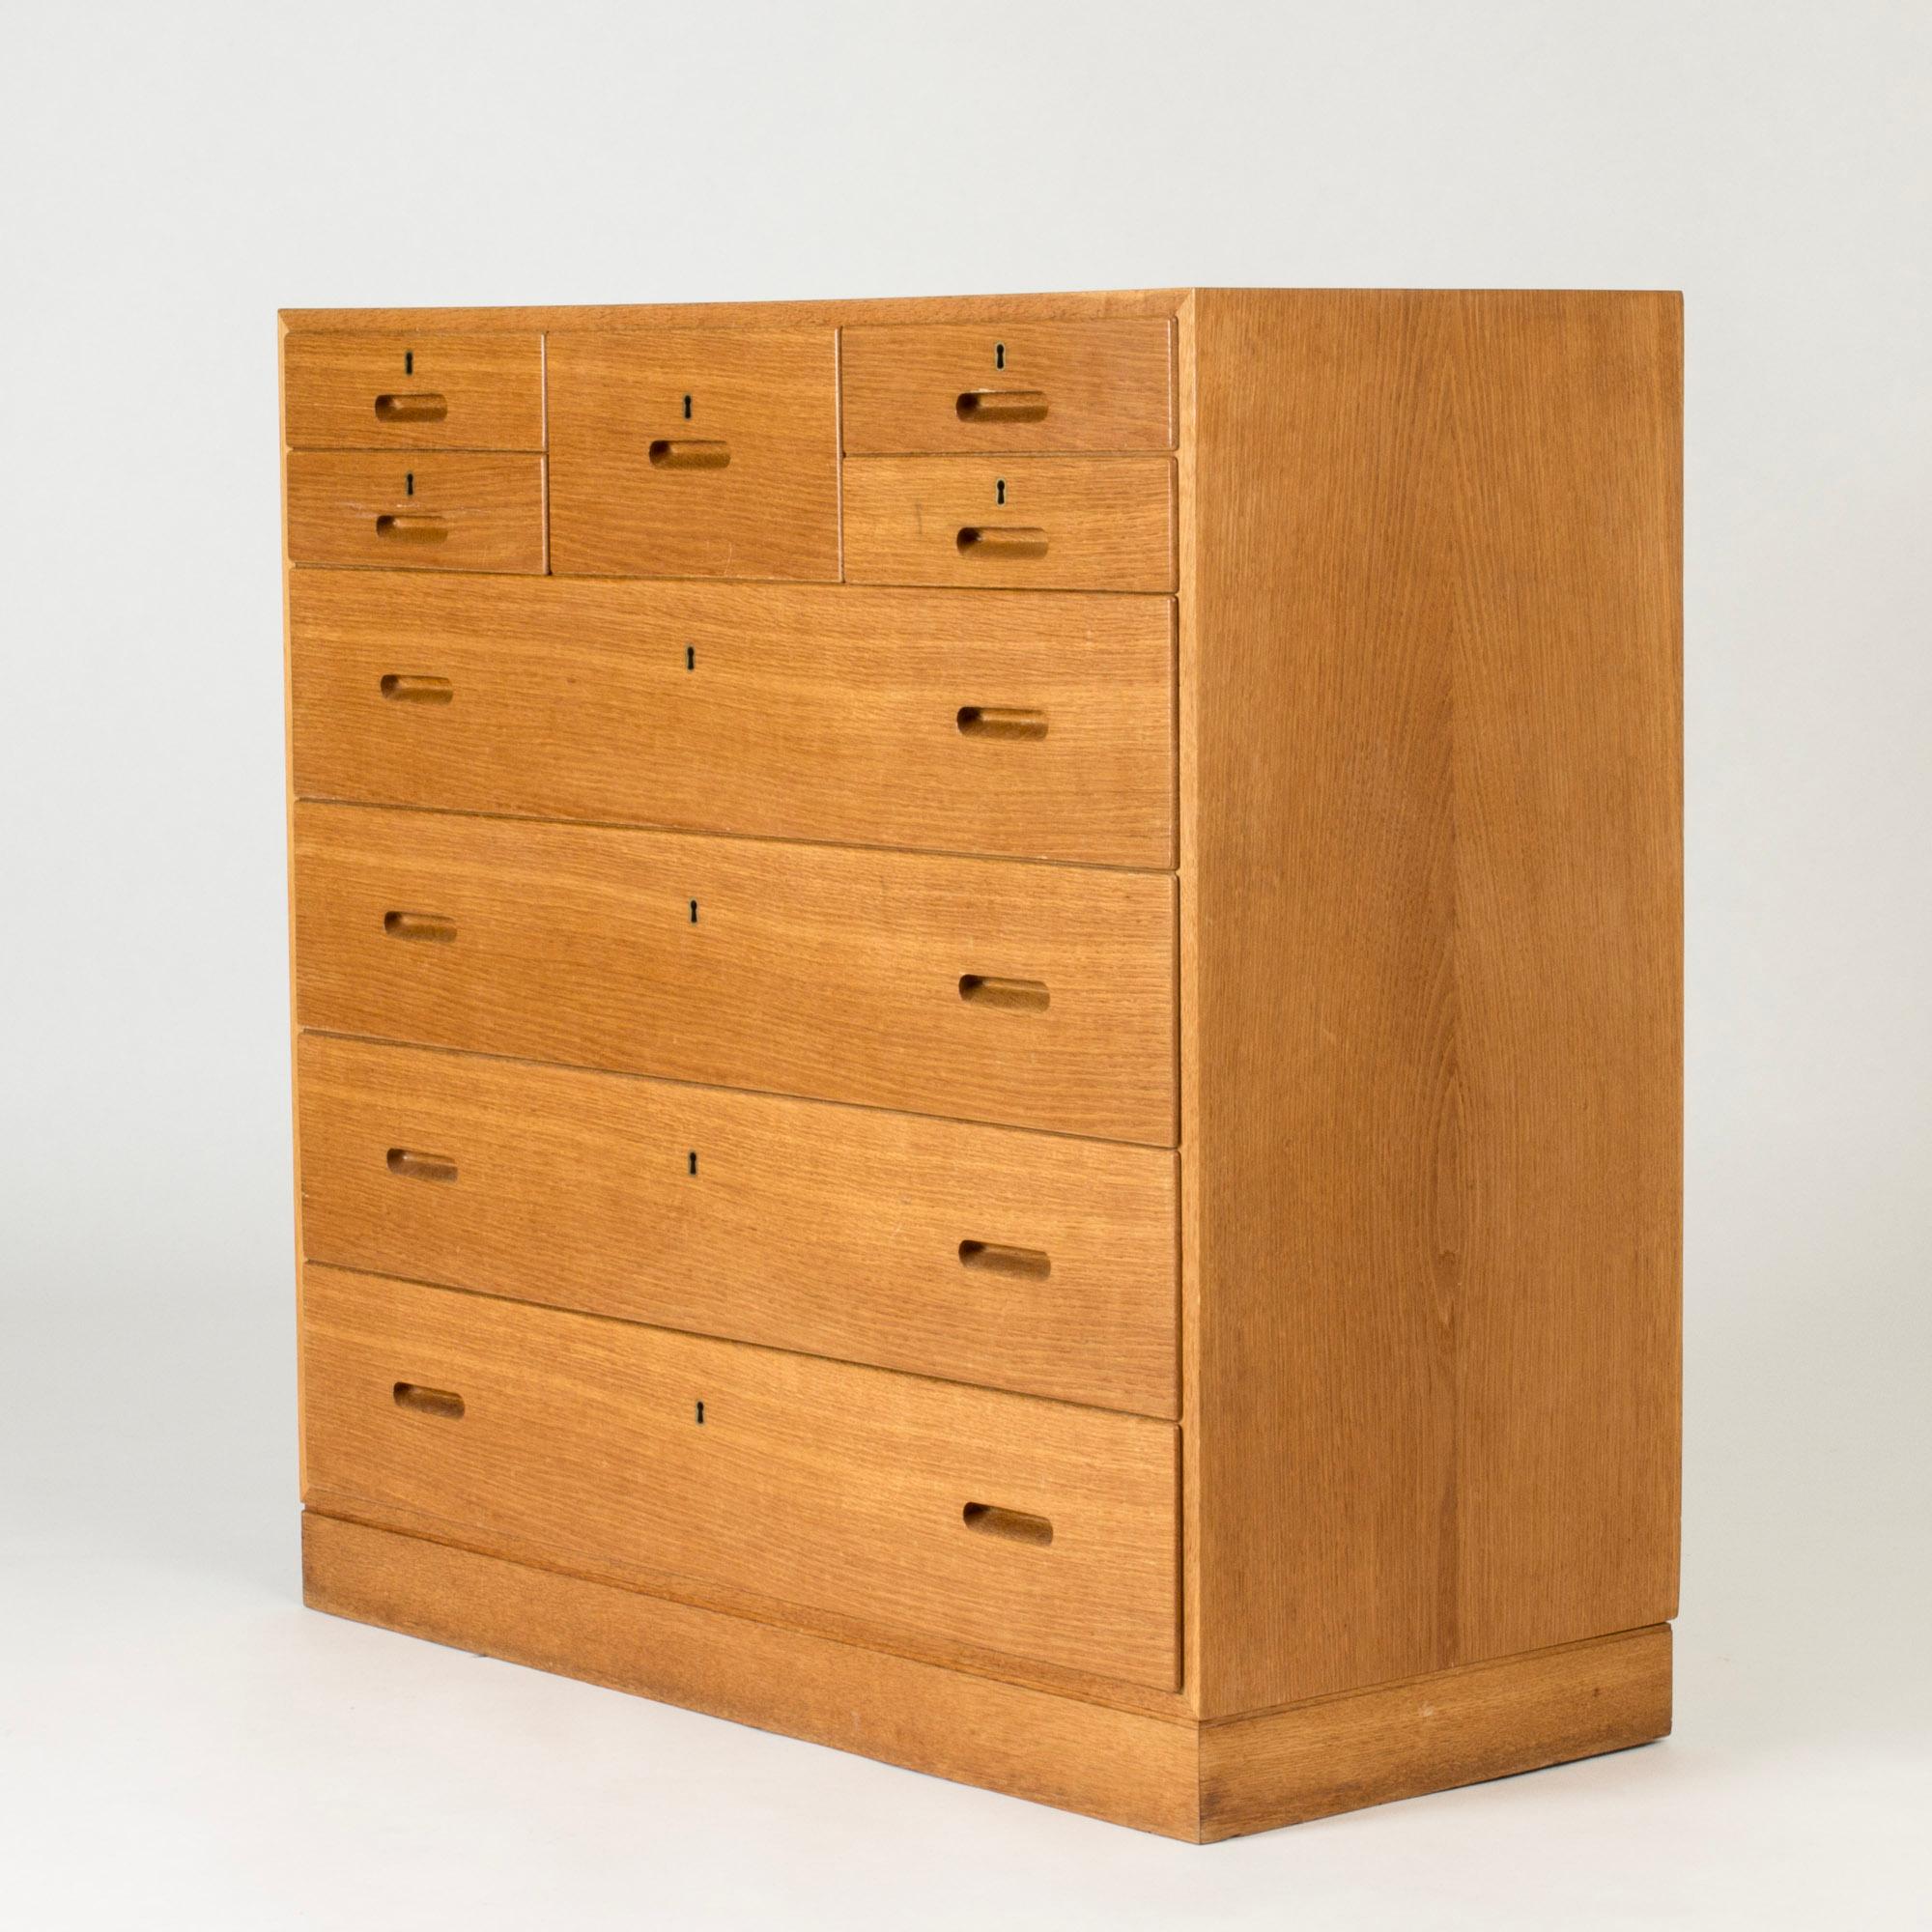 Cool chest of drawers by Kai Winding, made from oak in a lovely warm color. Large model with several drawers in different sizes, forming a cool pattern. Recessed drawer handles.